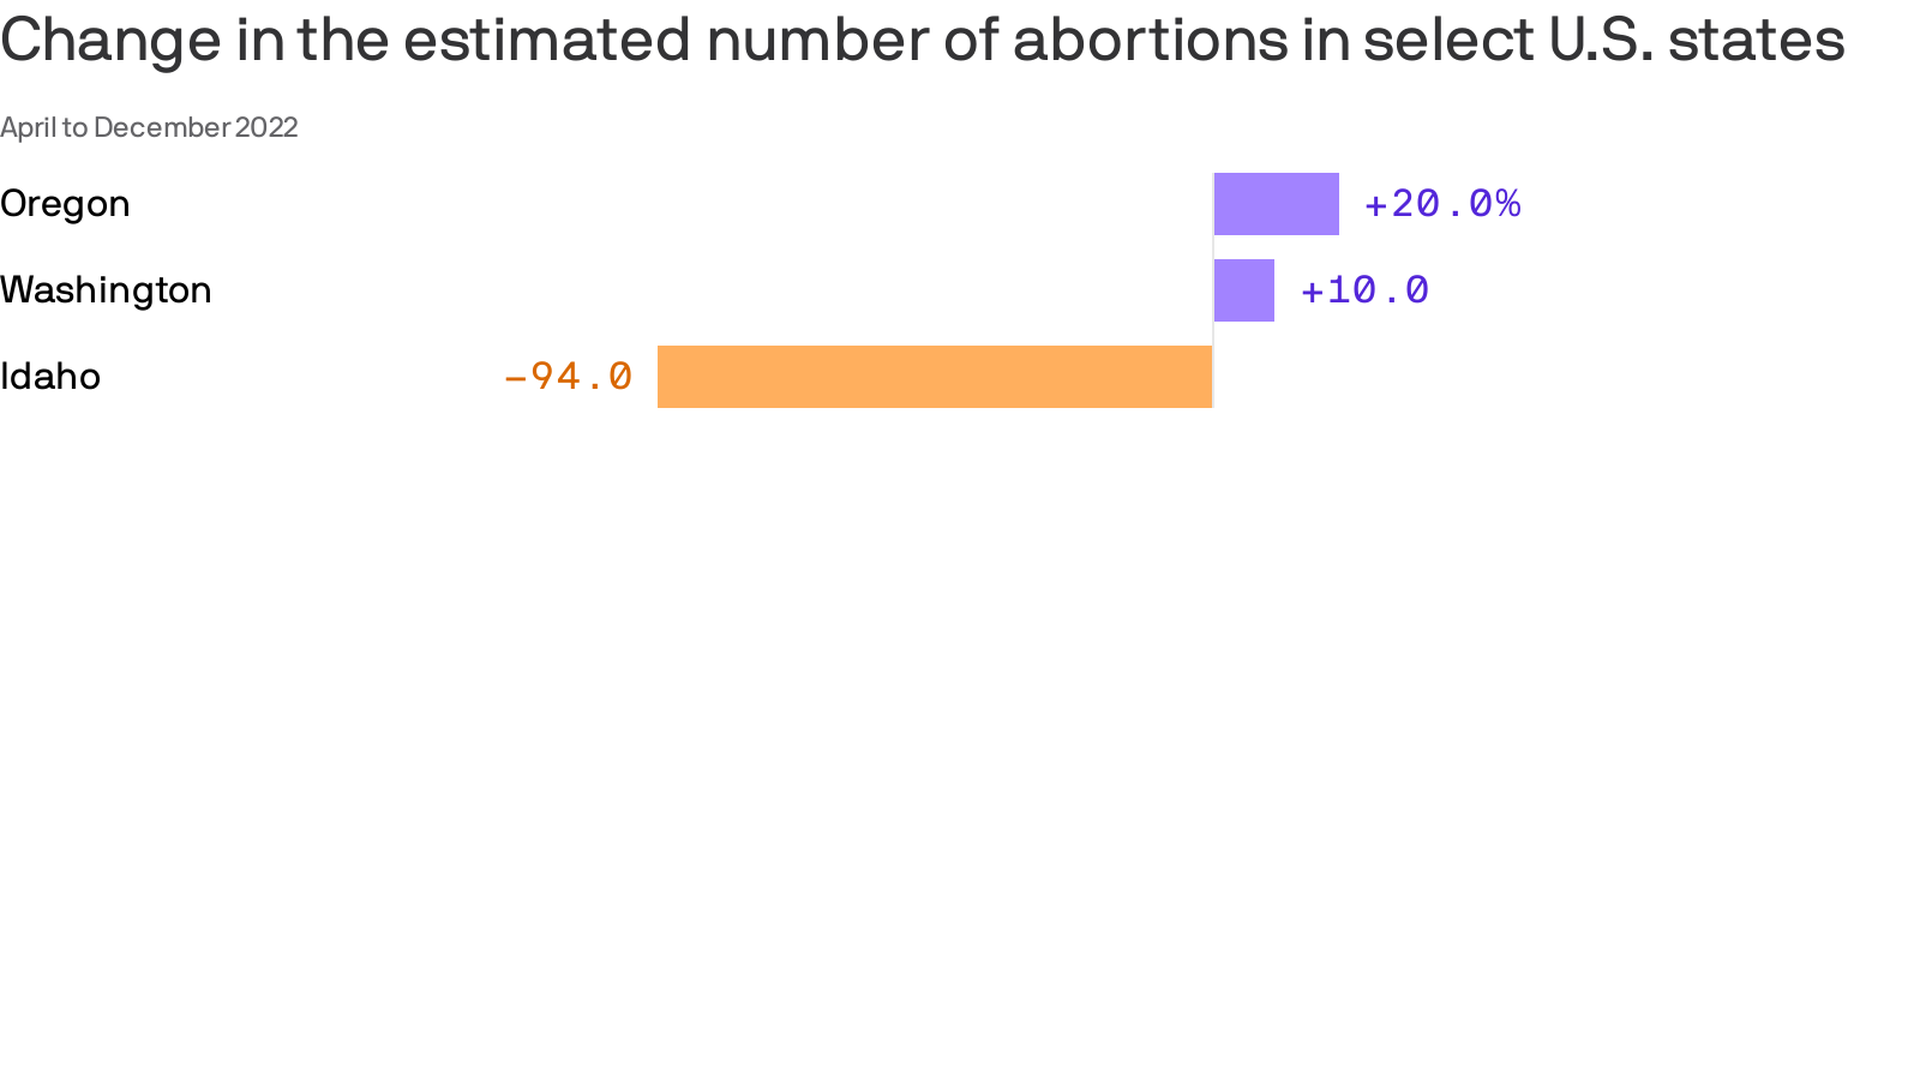 A bar chart shoing the change in estimated number of abortions in select U.S. States with Oregon abortions rising 20%, Washington's rising 10% and Idaho's falling by about 94%.